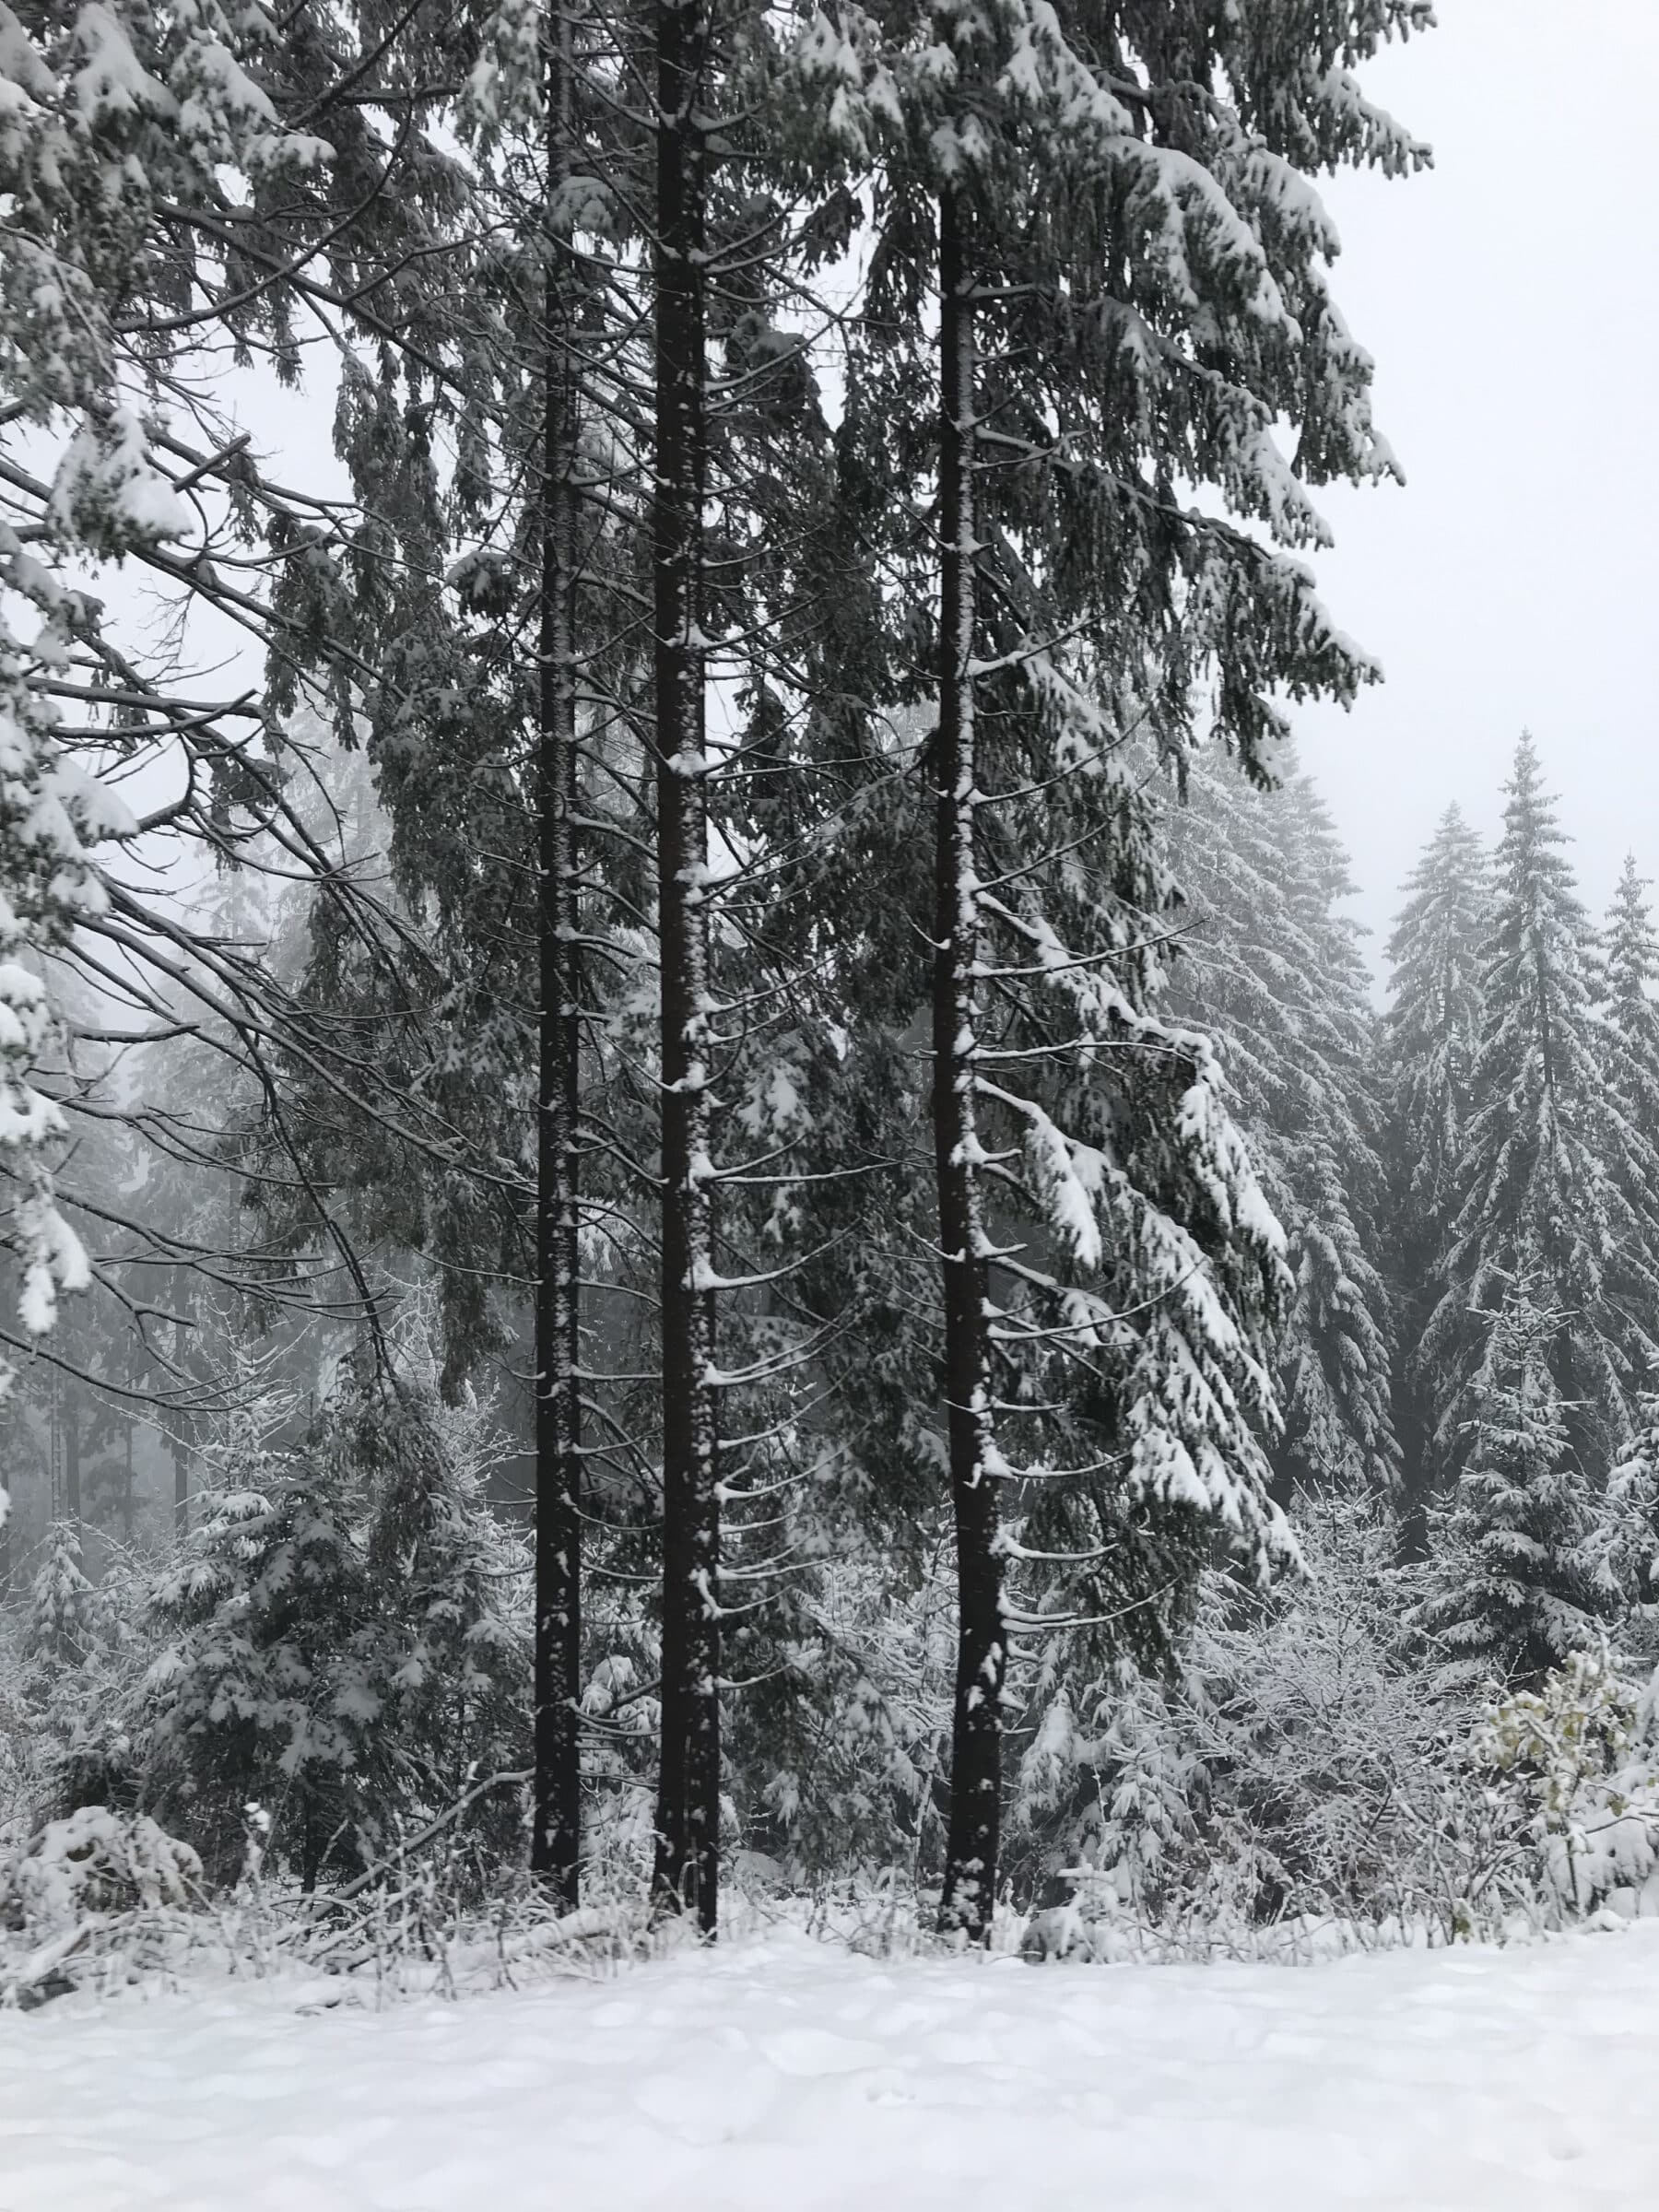 The snow-covered trees of the Black Forest